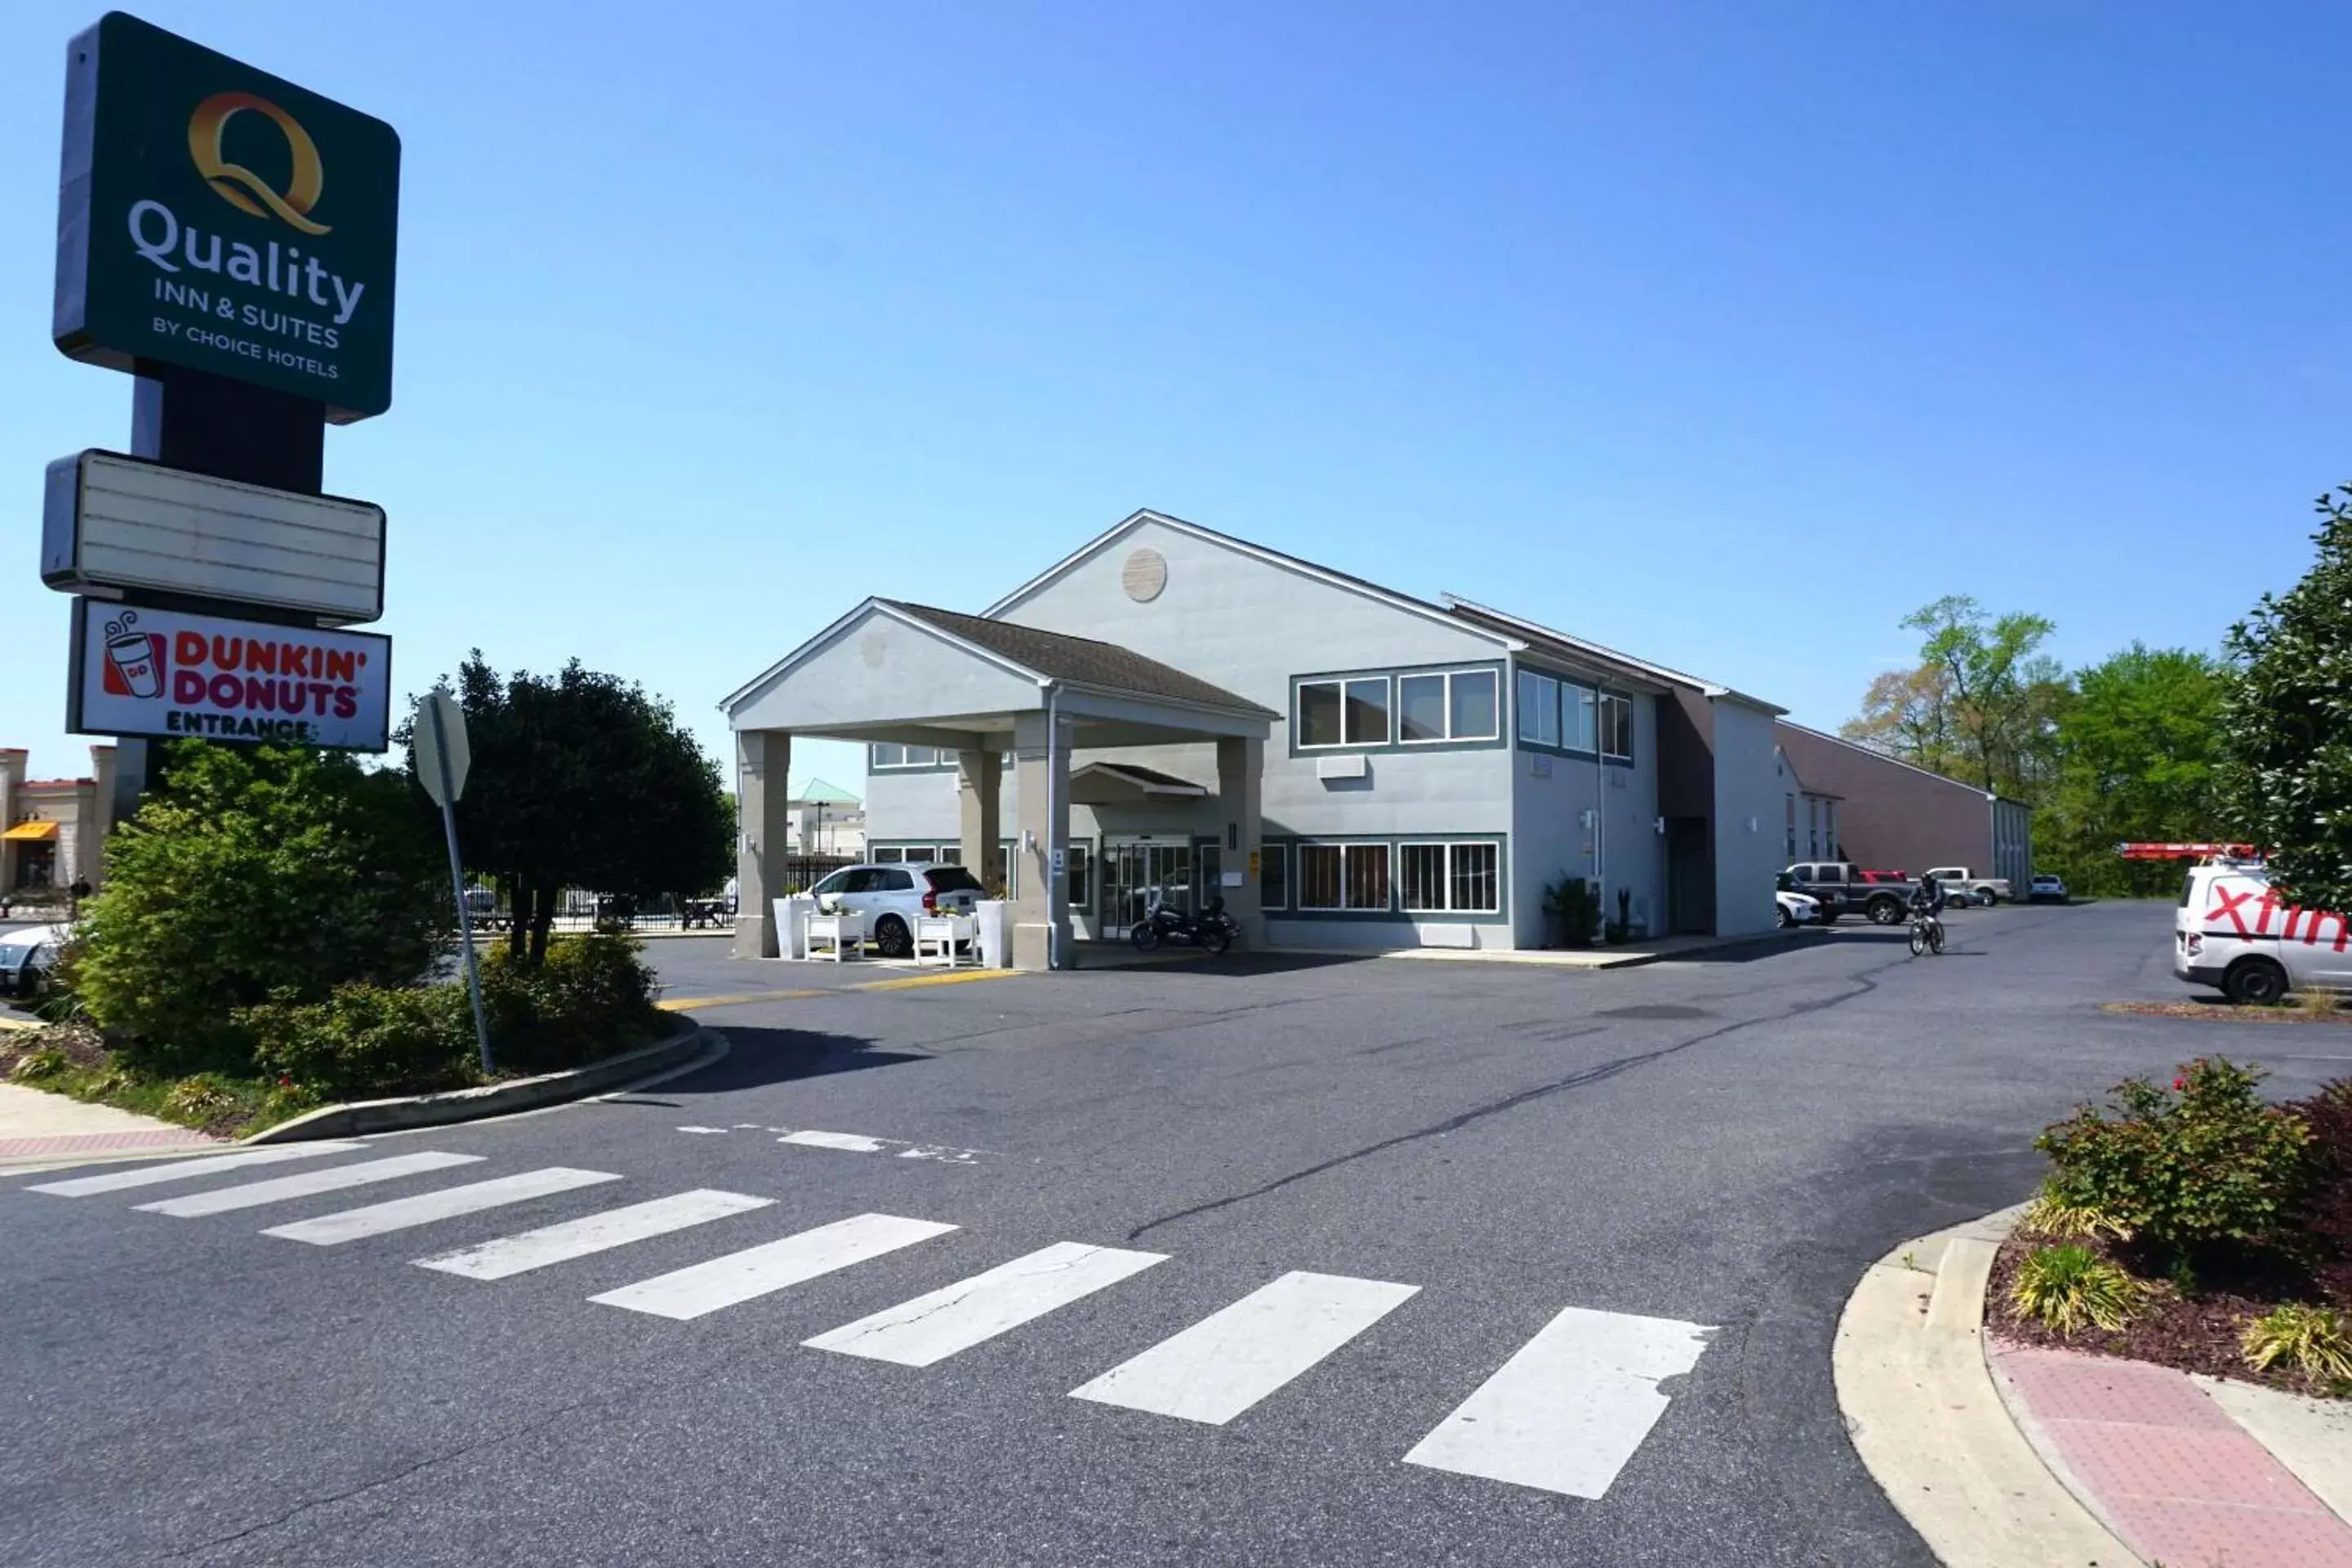 Property Building in Quality Inn & Suites Georgetown - Seaford